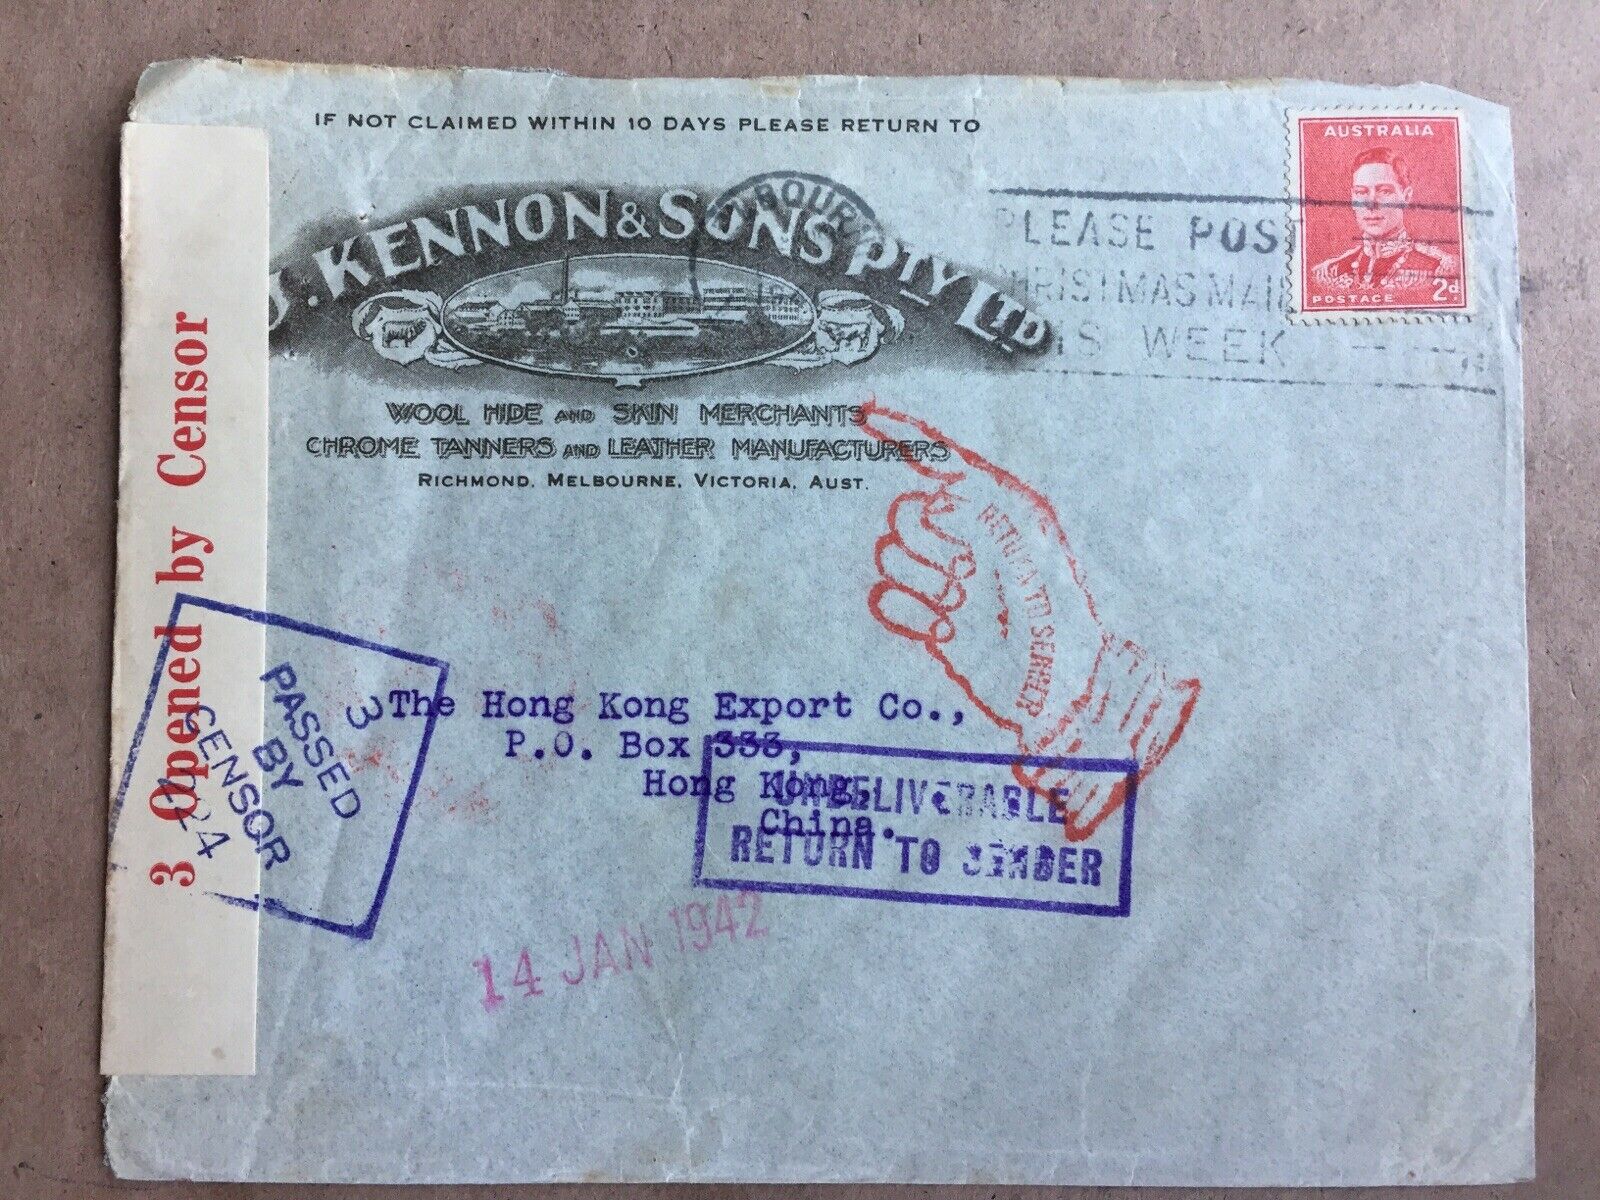 Australia - Hong Kong China Wool Advertising Cover Censored- WW2 undeliverable